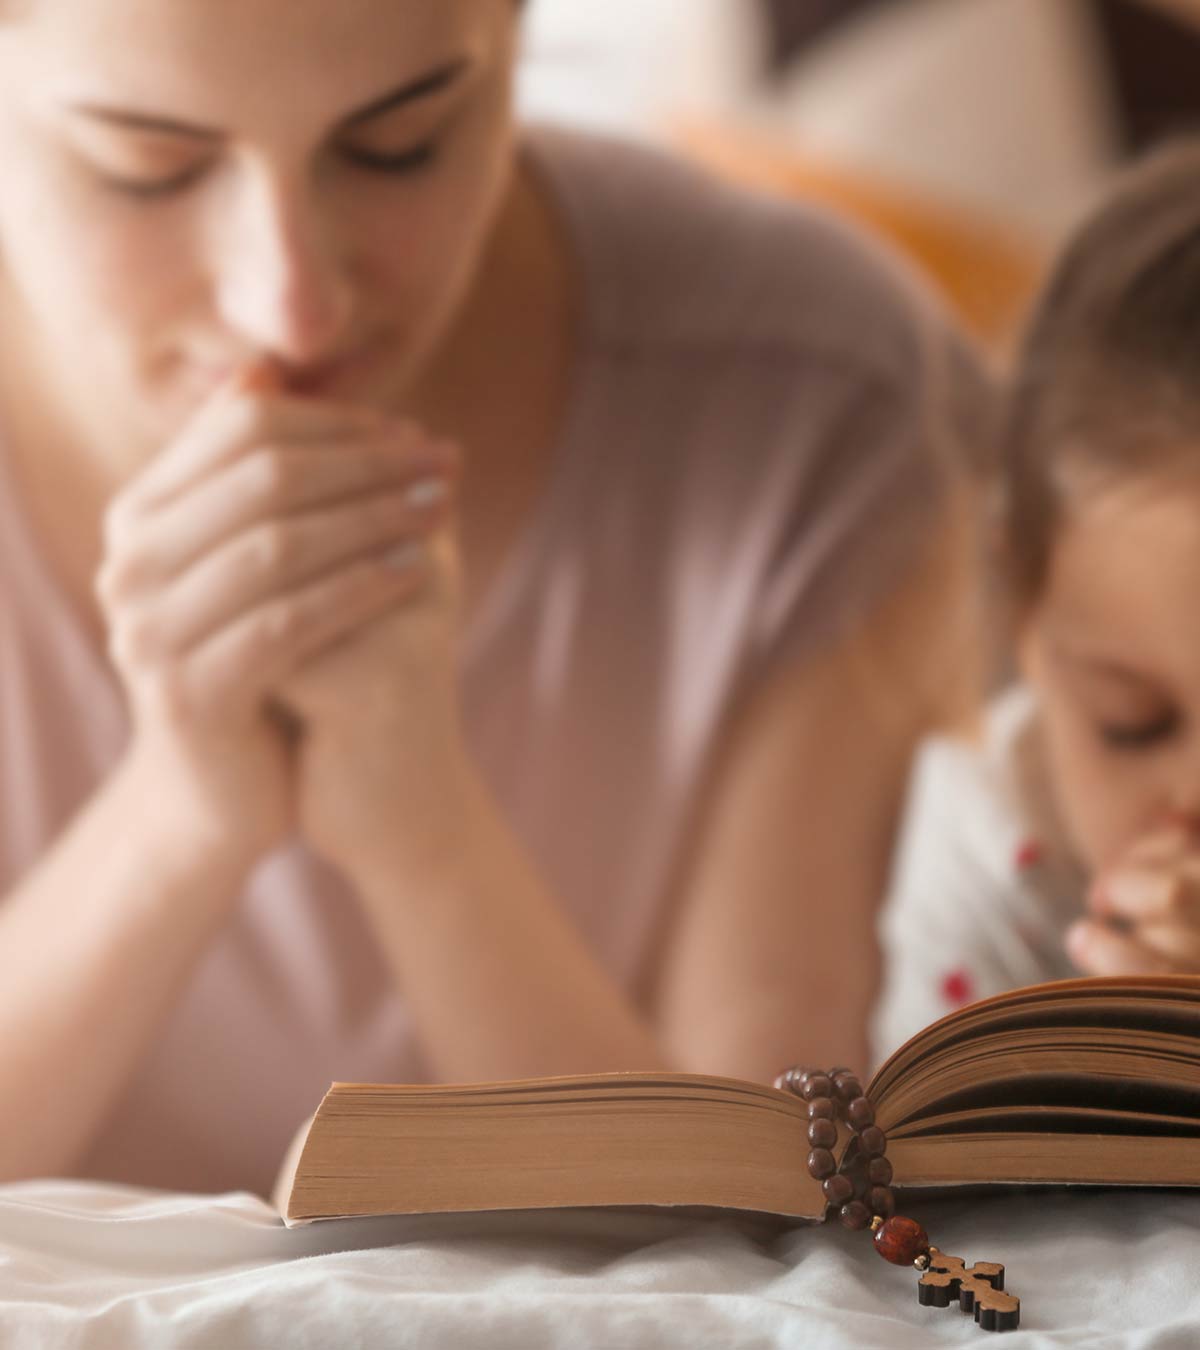 150+ Inspiring Bible Verses About Mother's Love